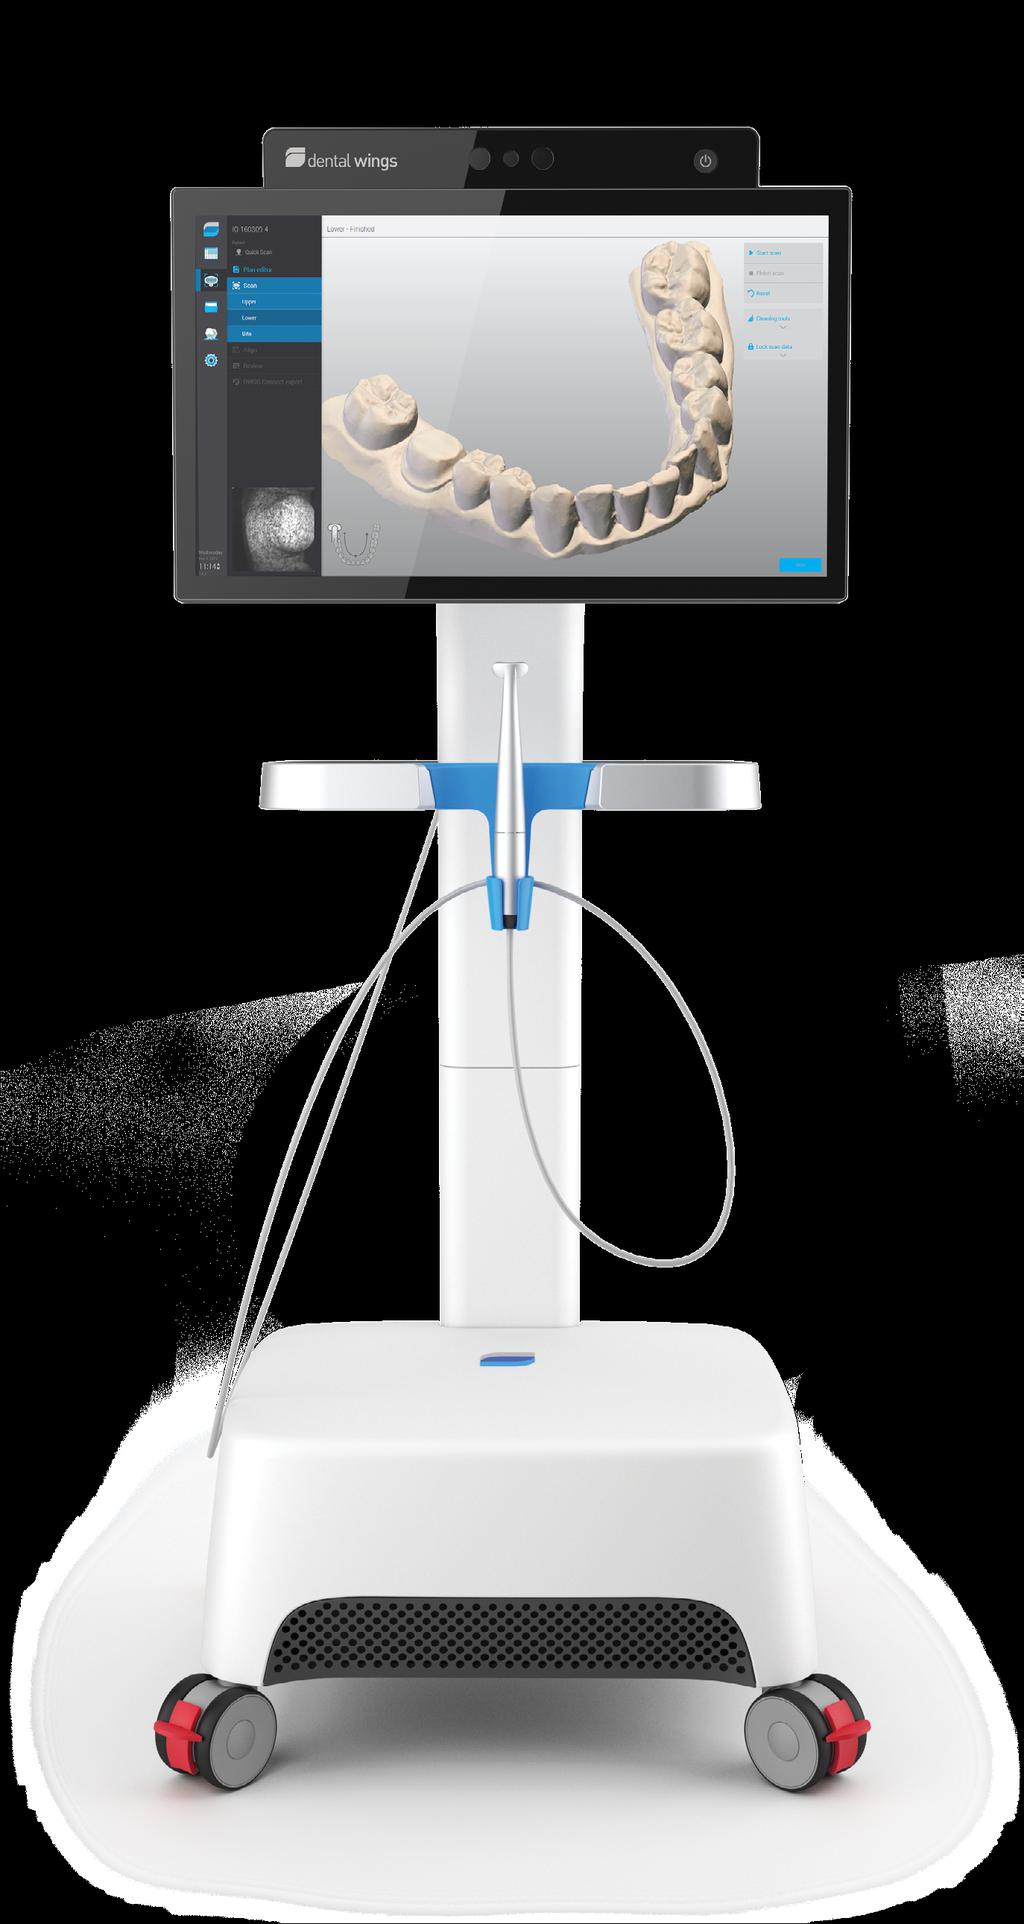 COMING SOON! POWDER-FREE SCANNING* Increased efficiency, accuracy, and comfort for your patient.